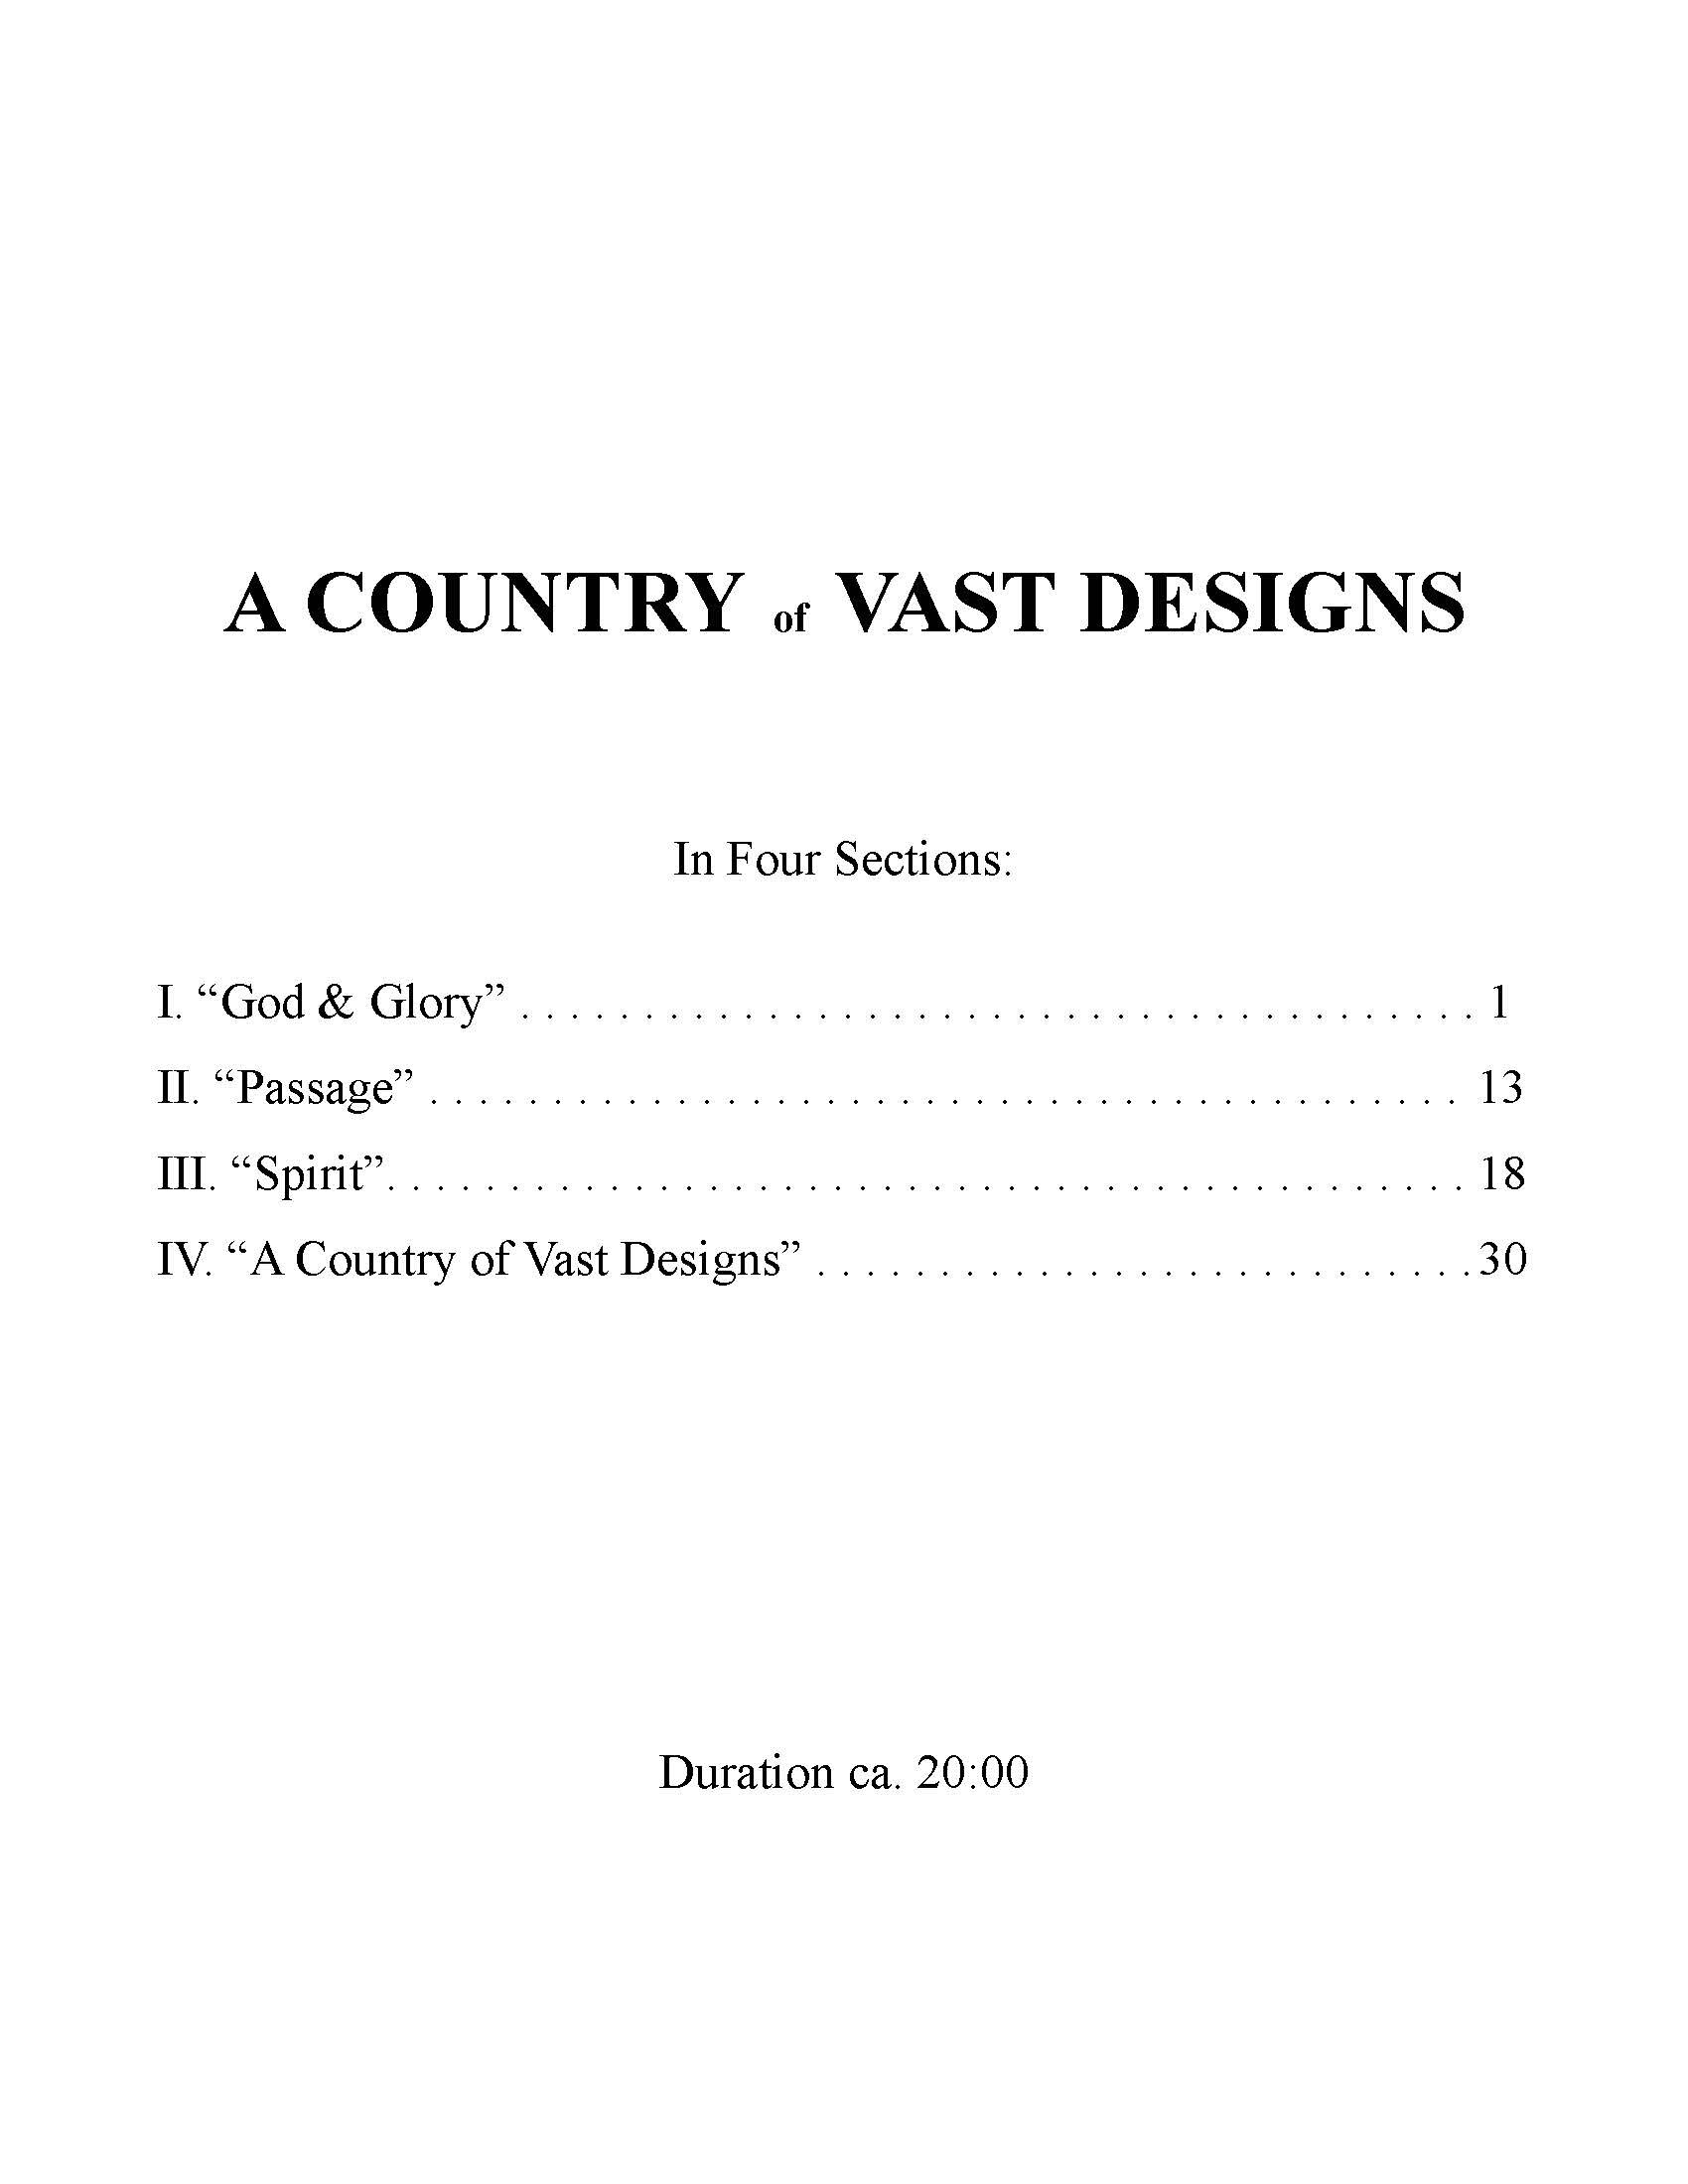 A Country of Vast Designs - Complete Score_Page_05.jpg